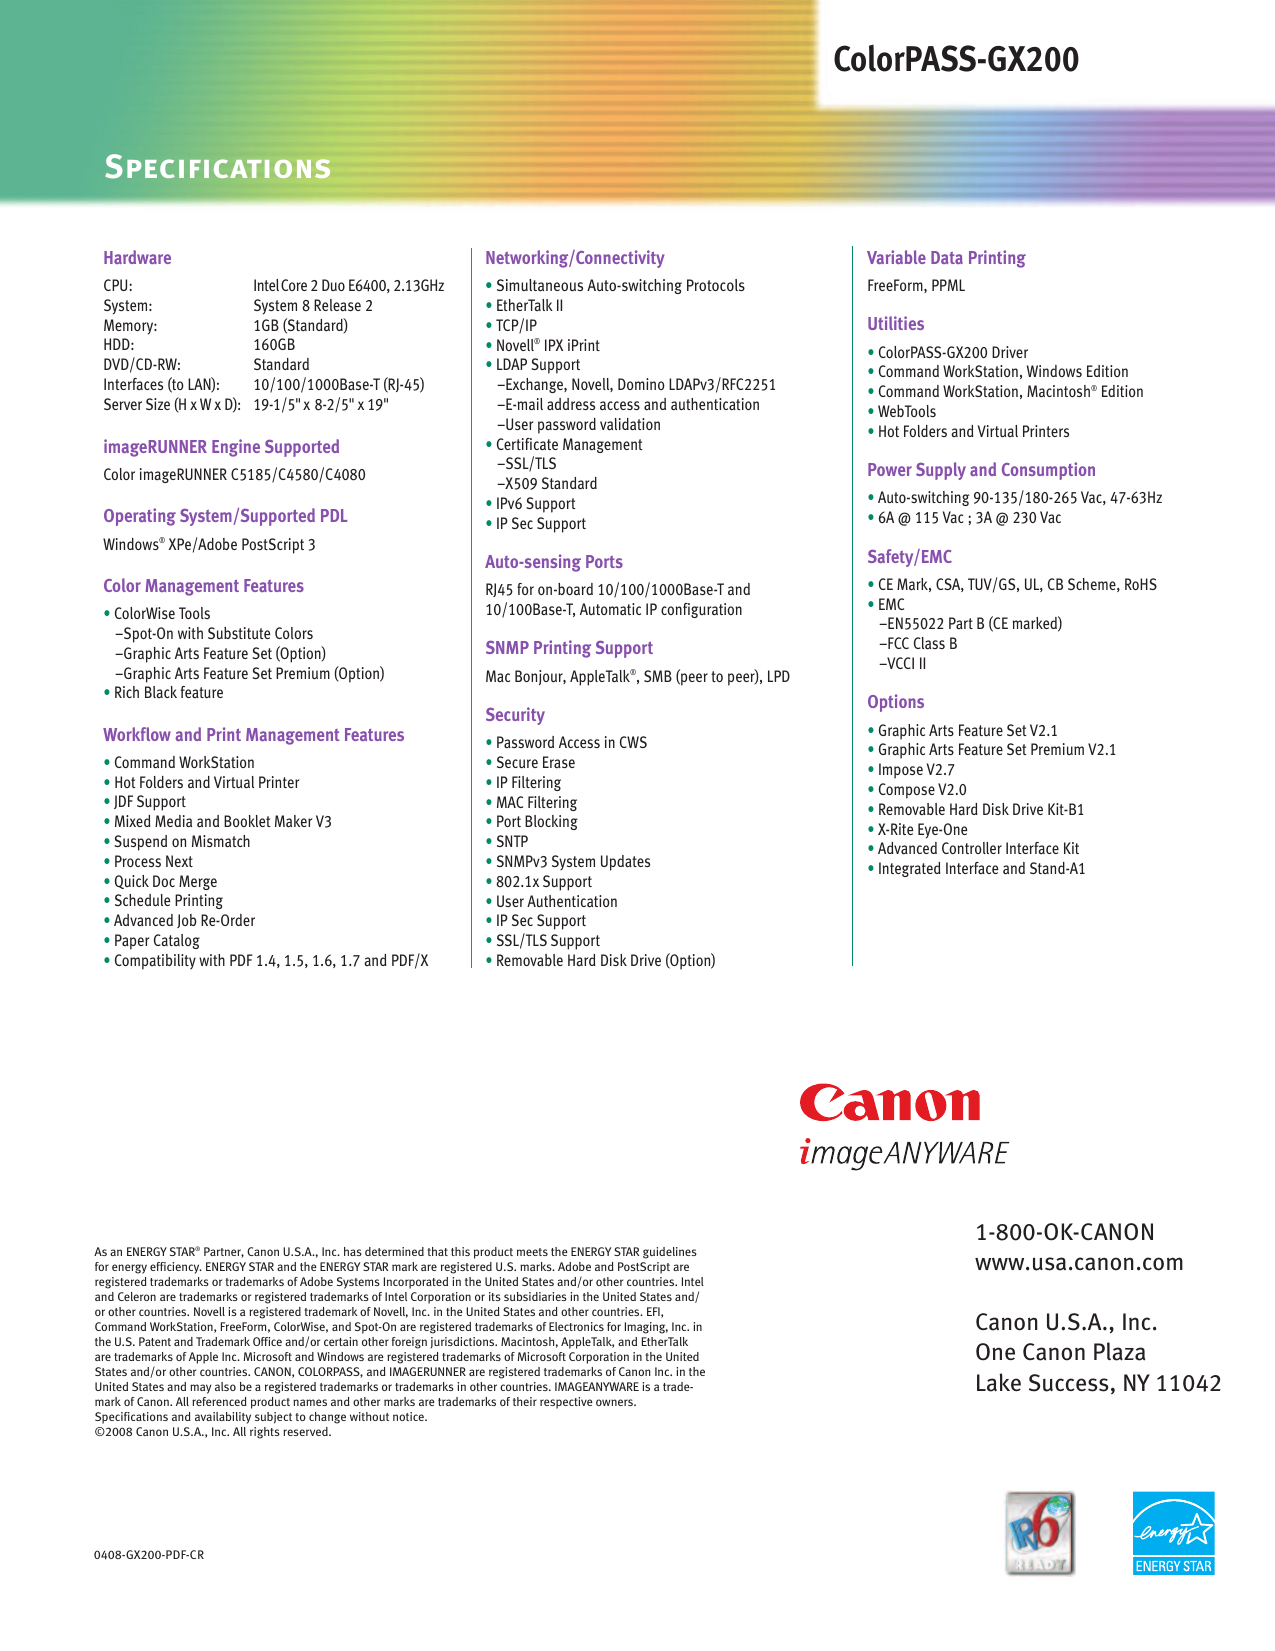 Page 4 of 4 - Canon Canon-Colorpass-Gx200-Specification-Sheet- C5180 Spec Sheet  Canon-colorpass-gx200-specification-sheet